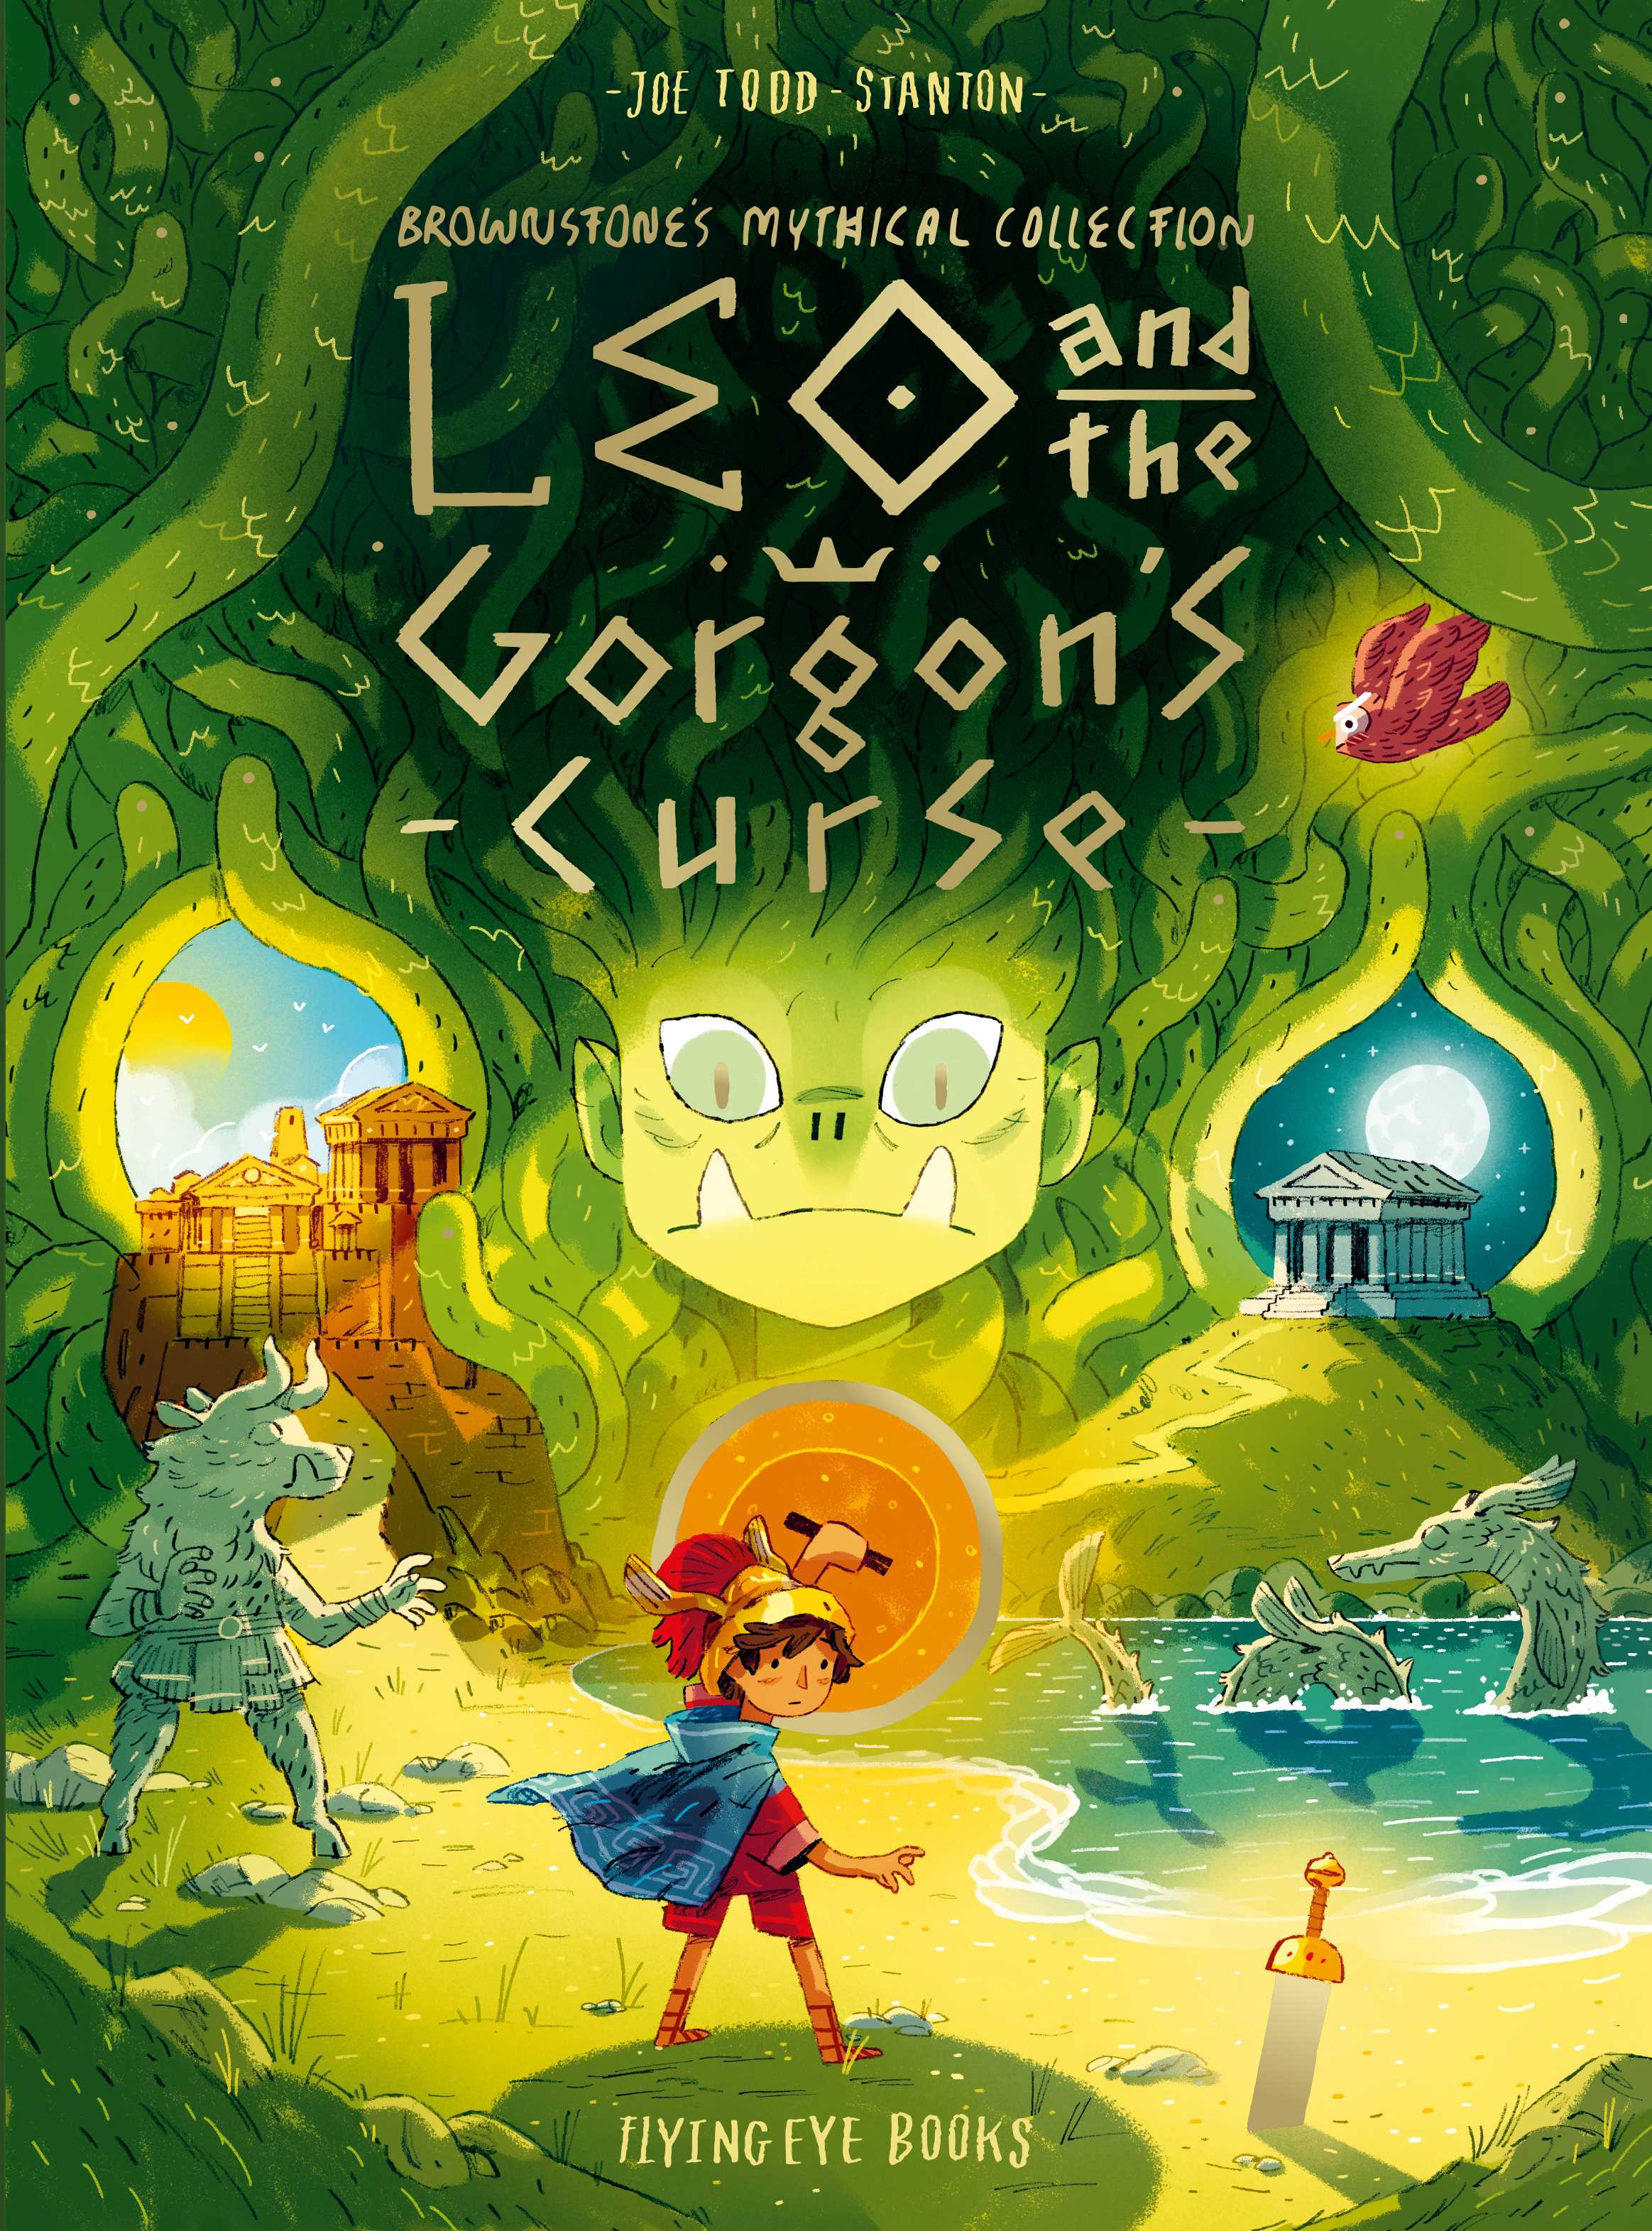 Brownstone's Mythical Collection #04: Leo and the Gorgon's Curse